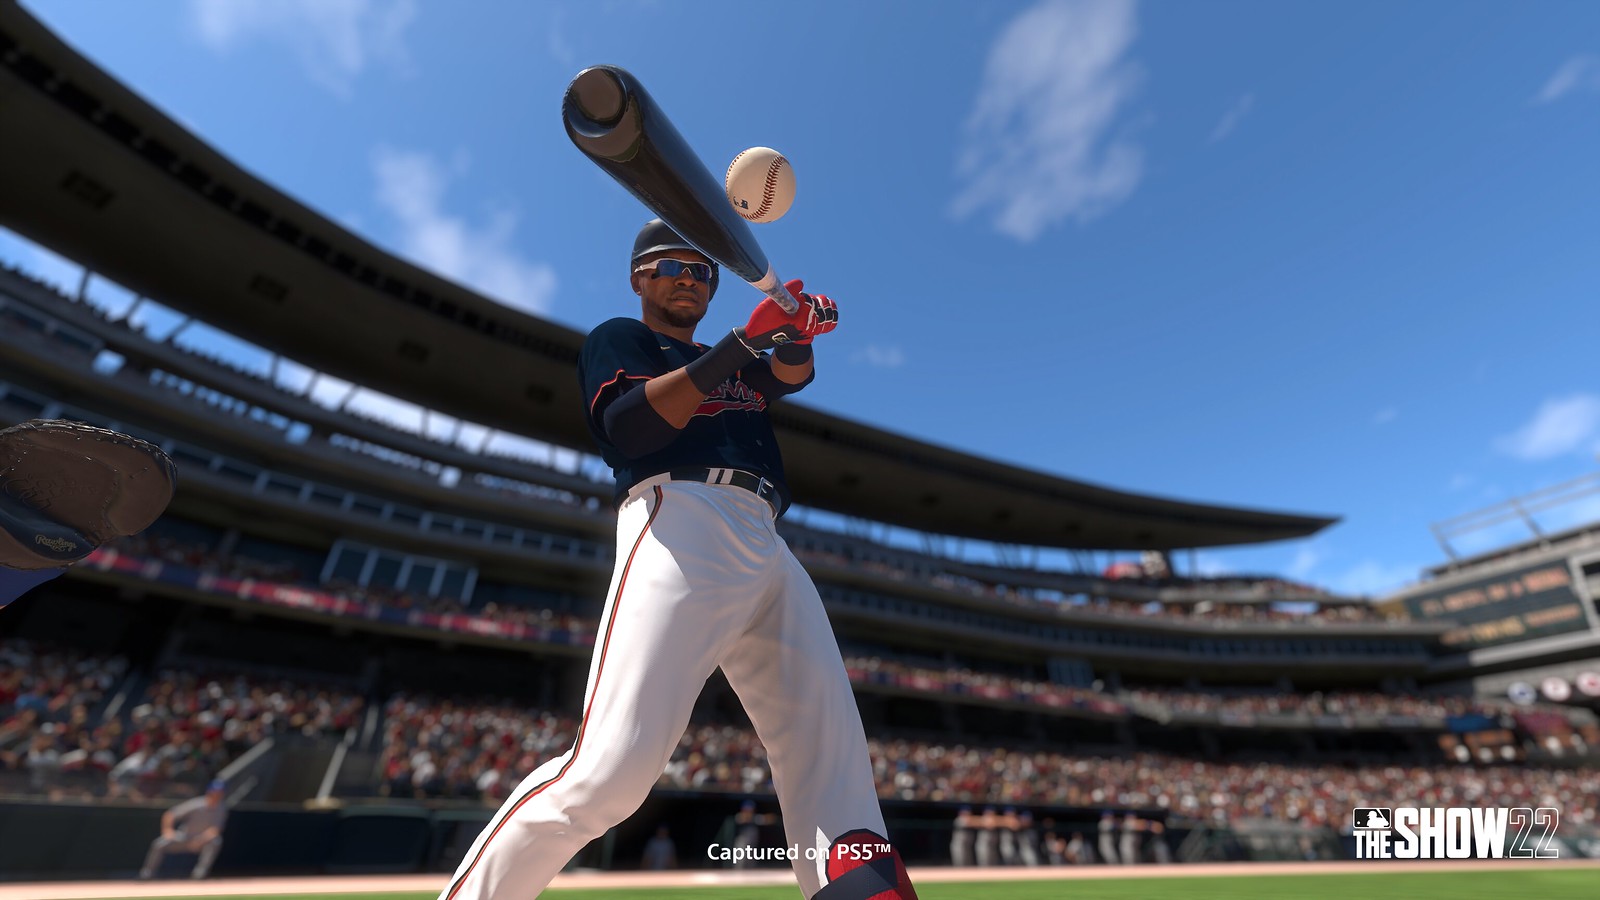 Xbox Game Pass April 2022 games include MLB: The Show 22 and Life